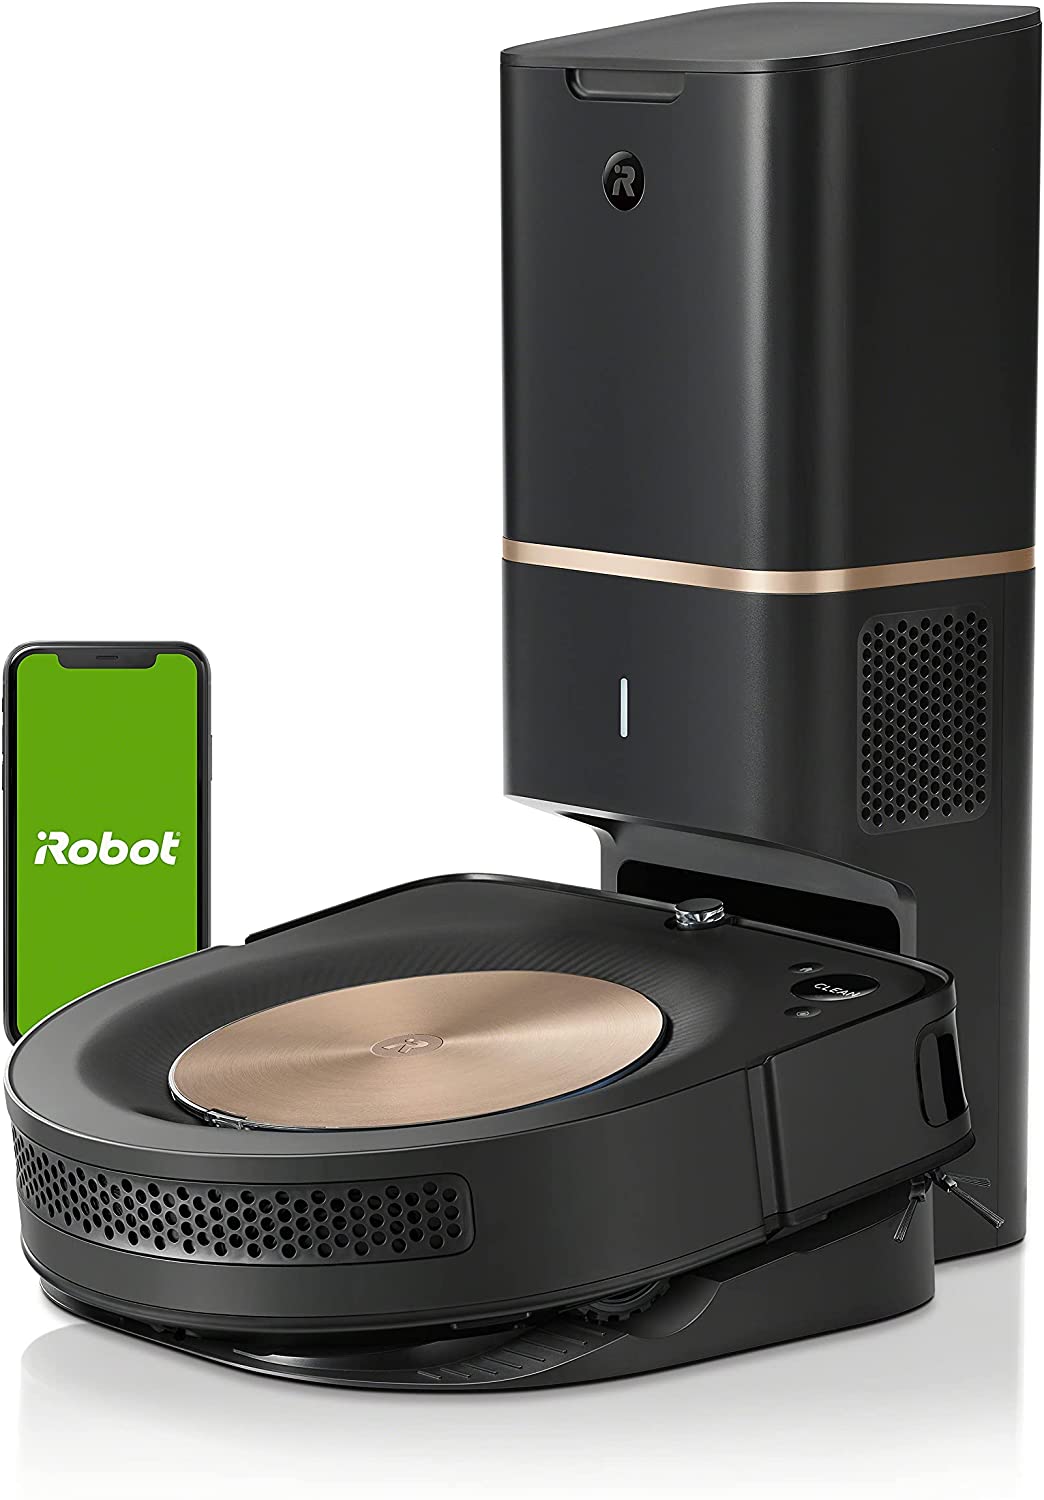 Read more about the article iRobot Roomba s9+ Review